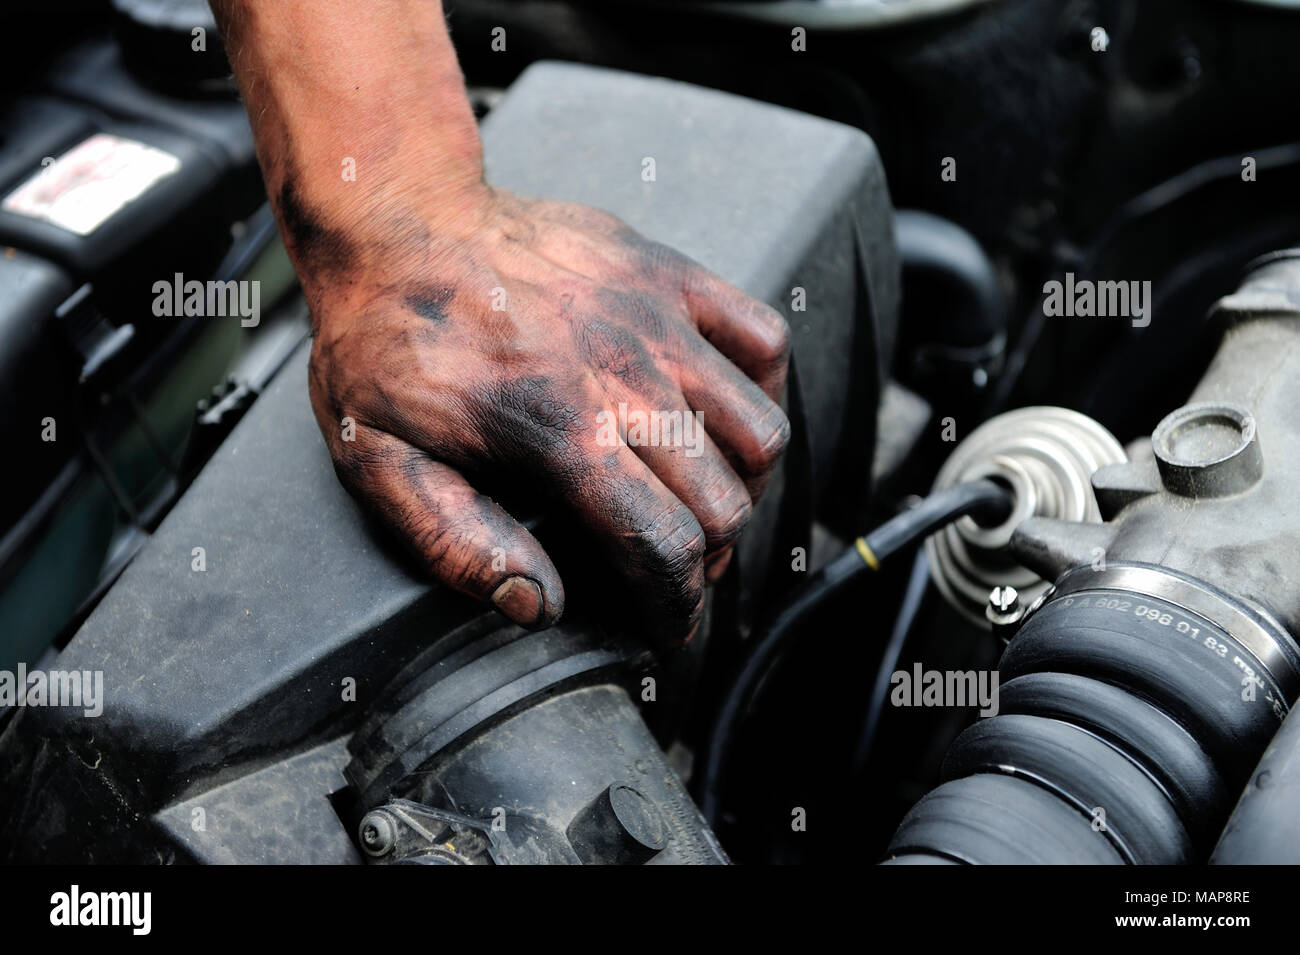 a person, a working, arm, black works, craftemployment, illegally employment, illicit workprofessional life, professionally, hard, danger, work Stock Photo